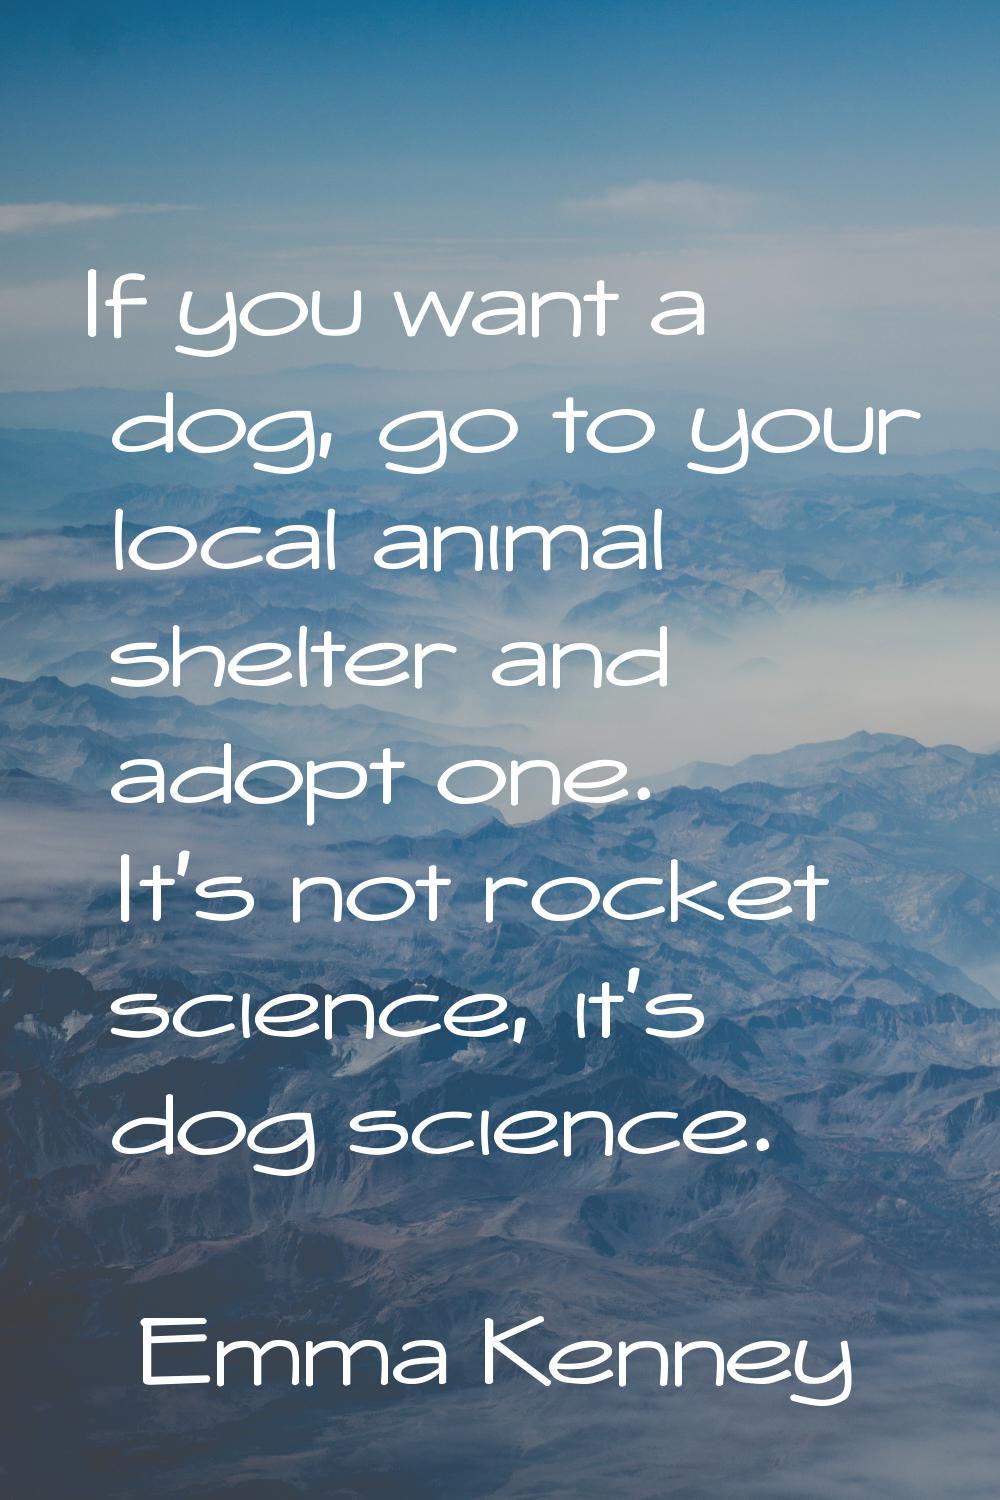 If you want a dog, go to your local animal shelter and adopt one. It's not rocket science, it's dog